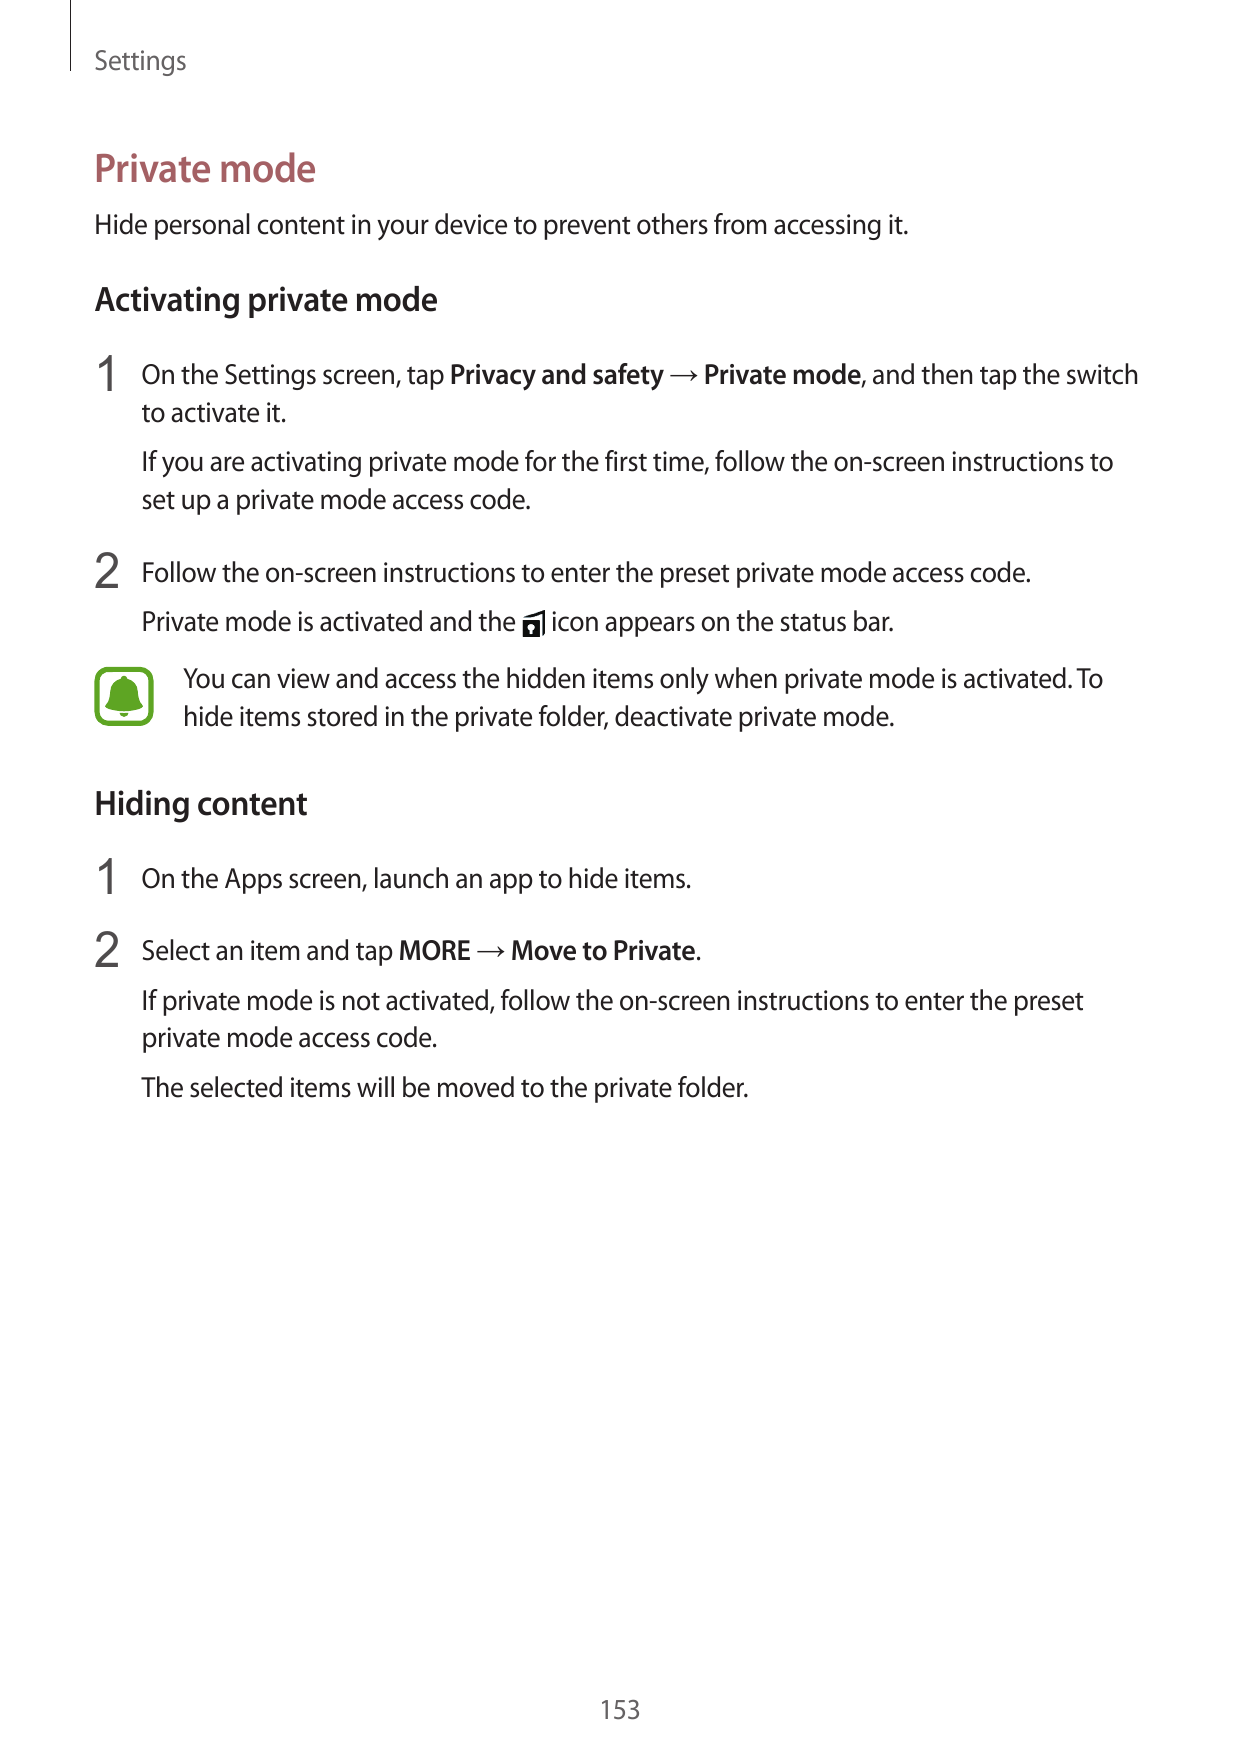 SettingsPrivate modeHide personal content in your device to prevent others from accessing it.Activating private mode1 On the Set